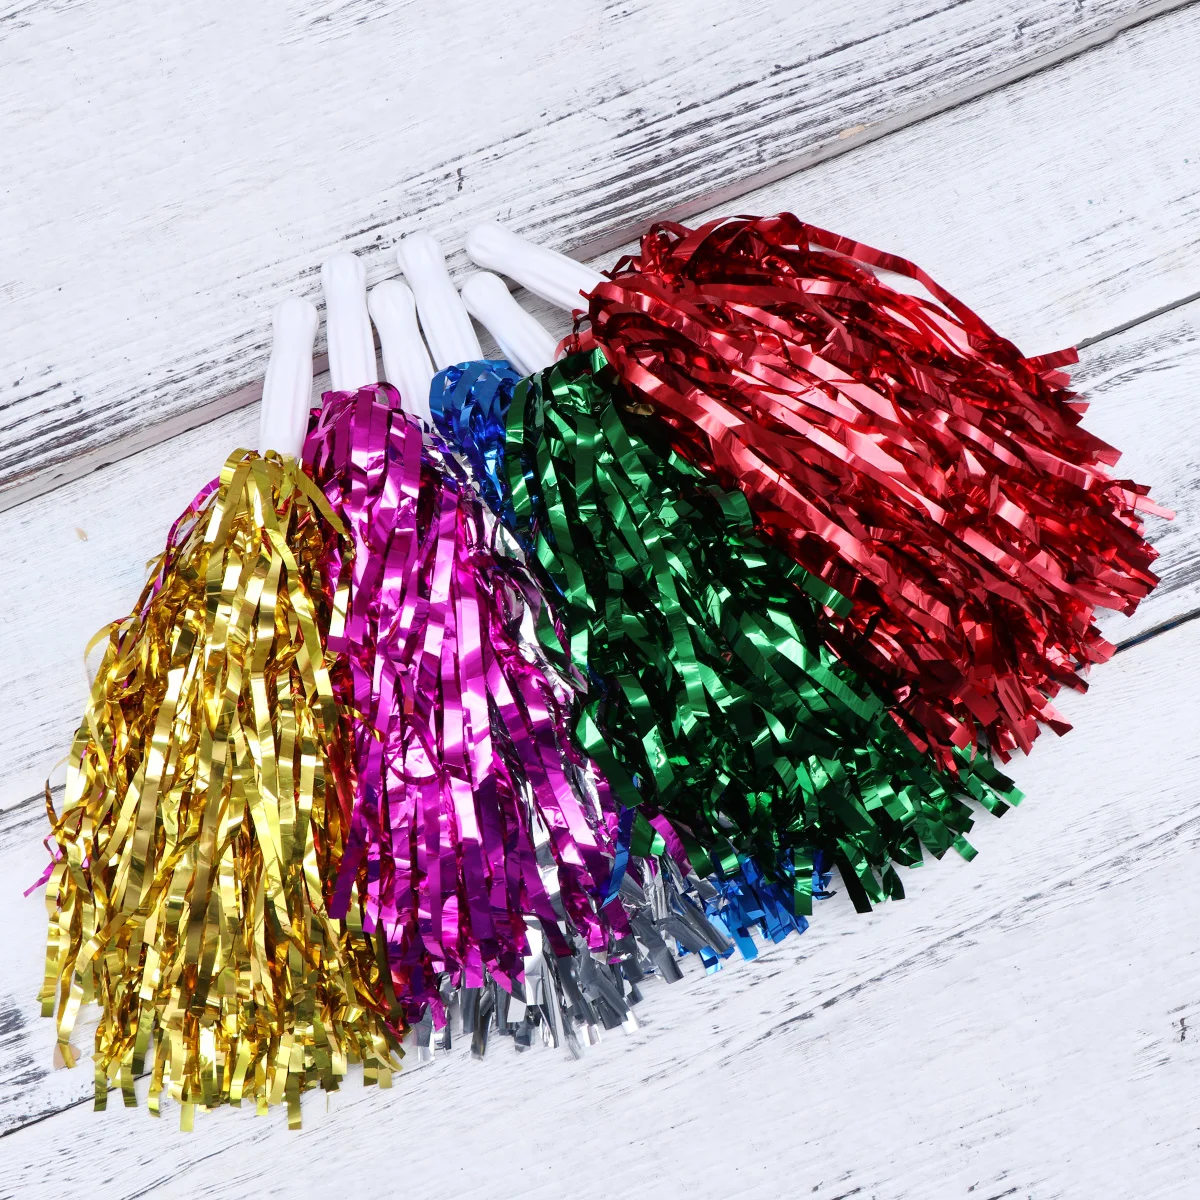 12pcs Straight Handle Cheering Poms Spirited Fun Cheerleading Kit Cheer Props for Performance Competition Cheering Sports Events